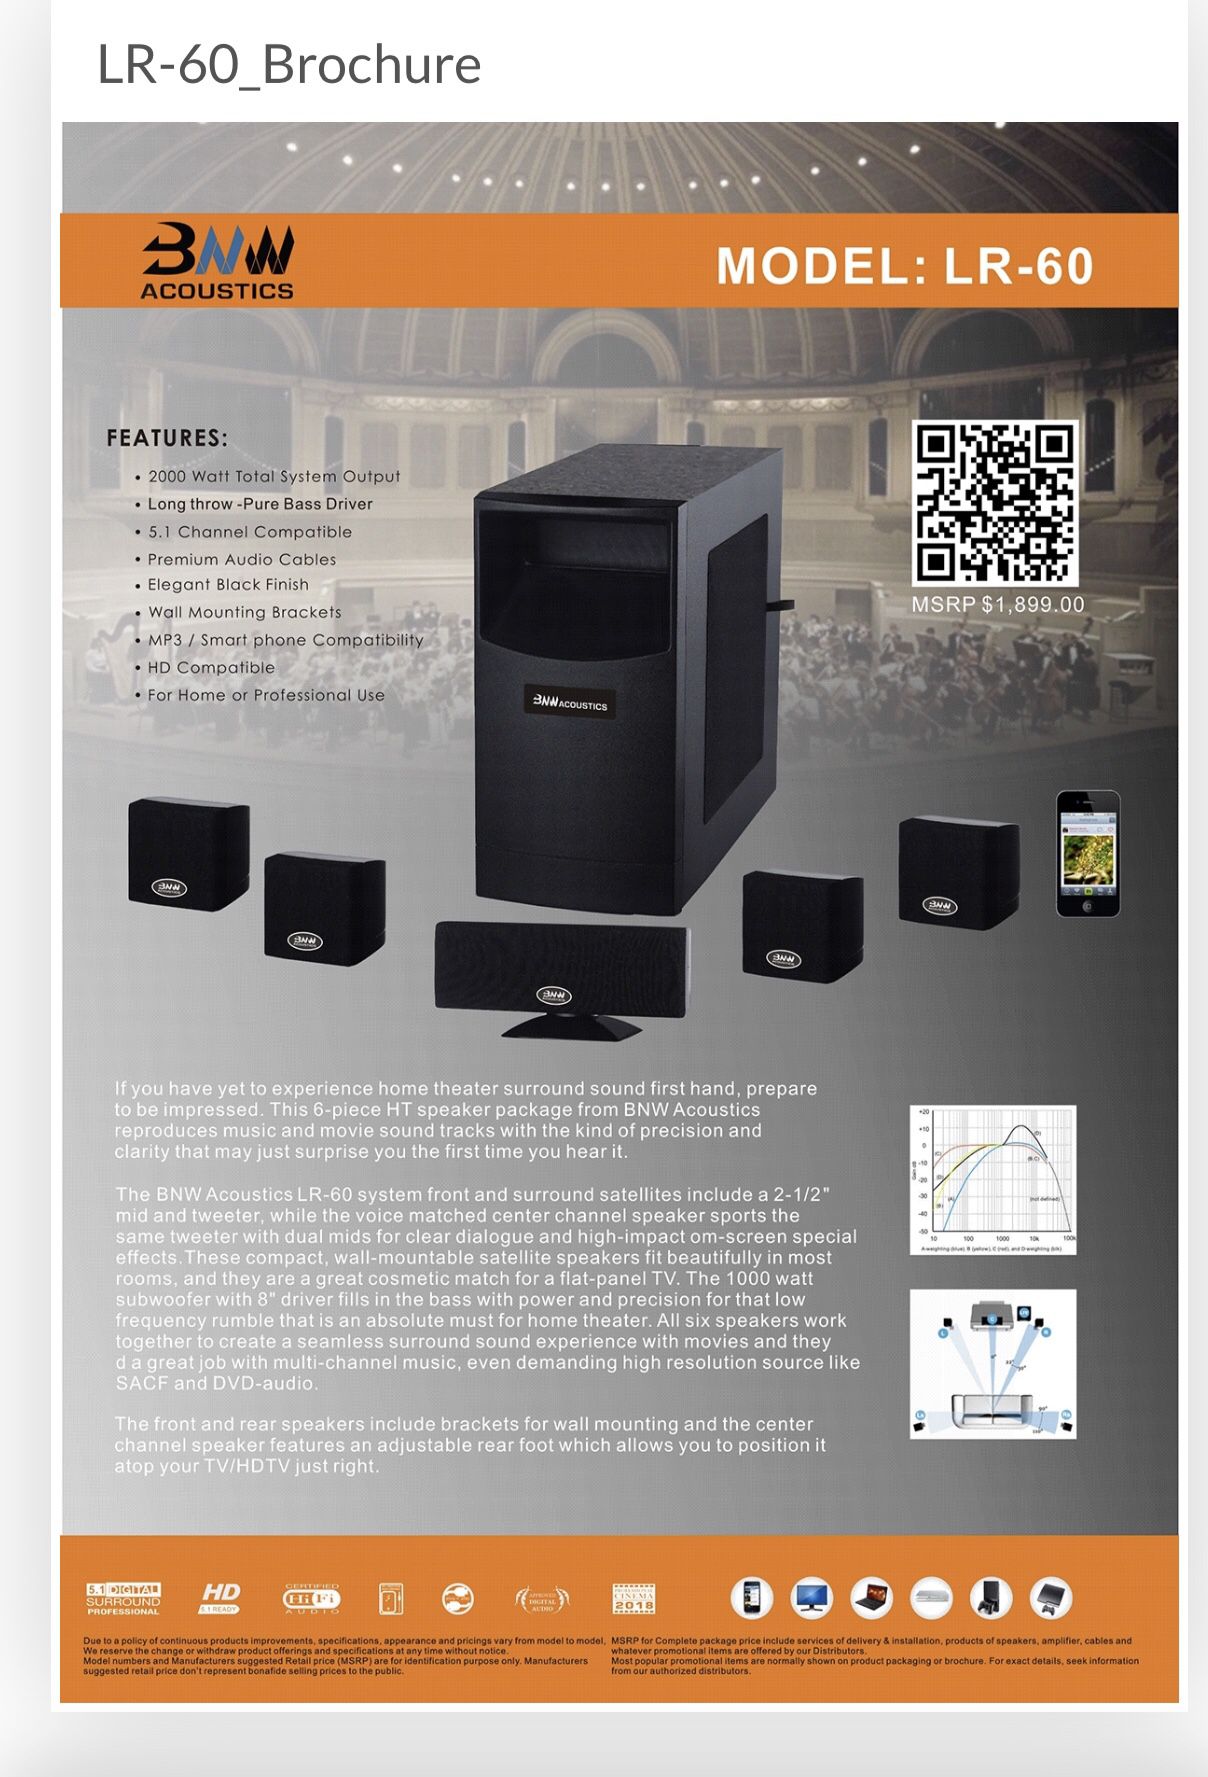 BNW Acoustics LR-60 Home Theater System